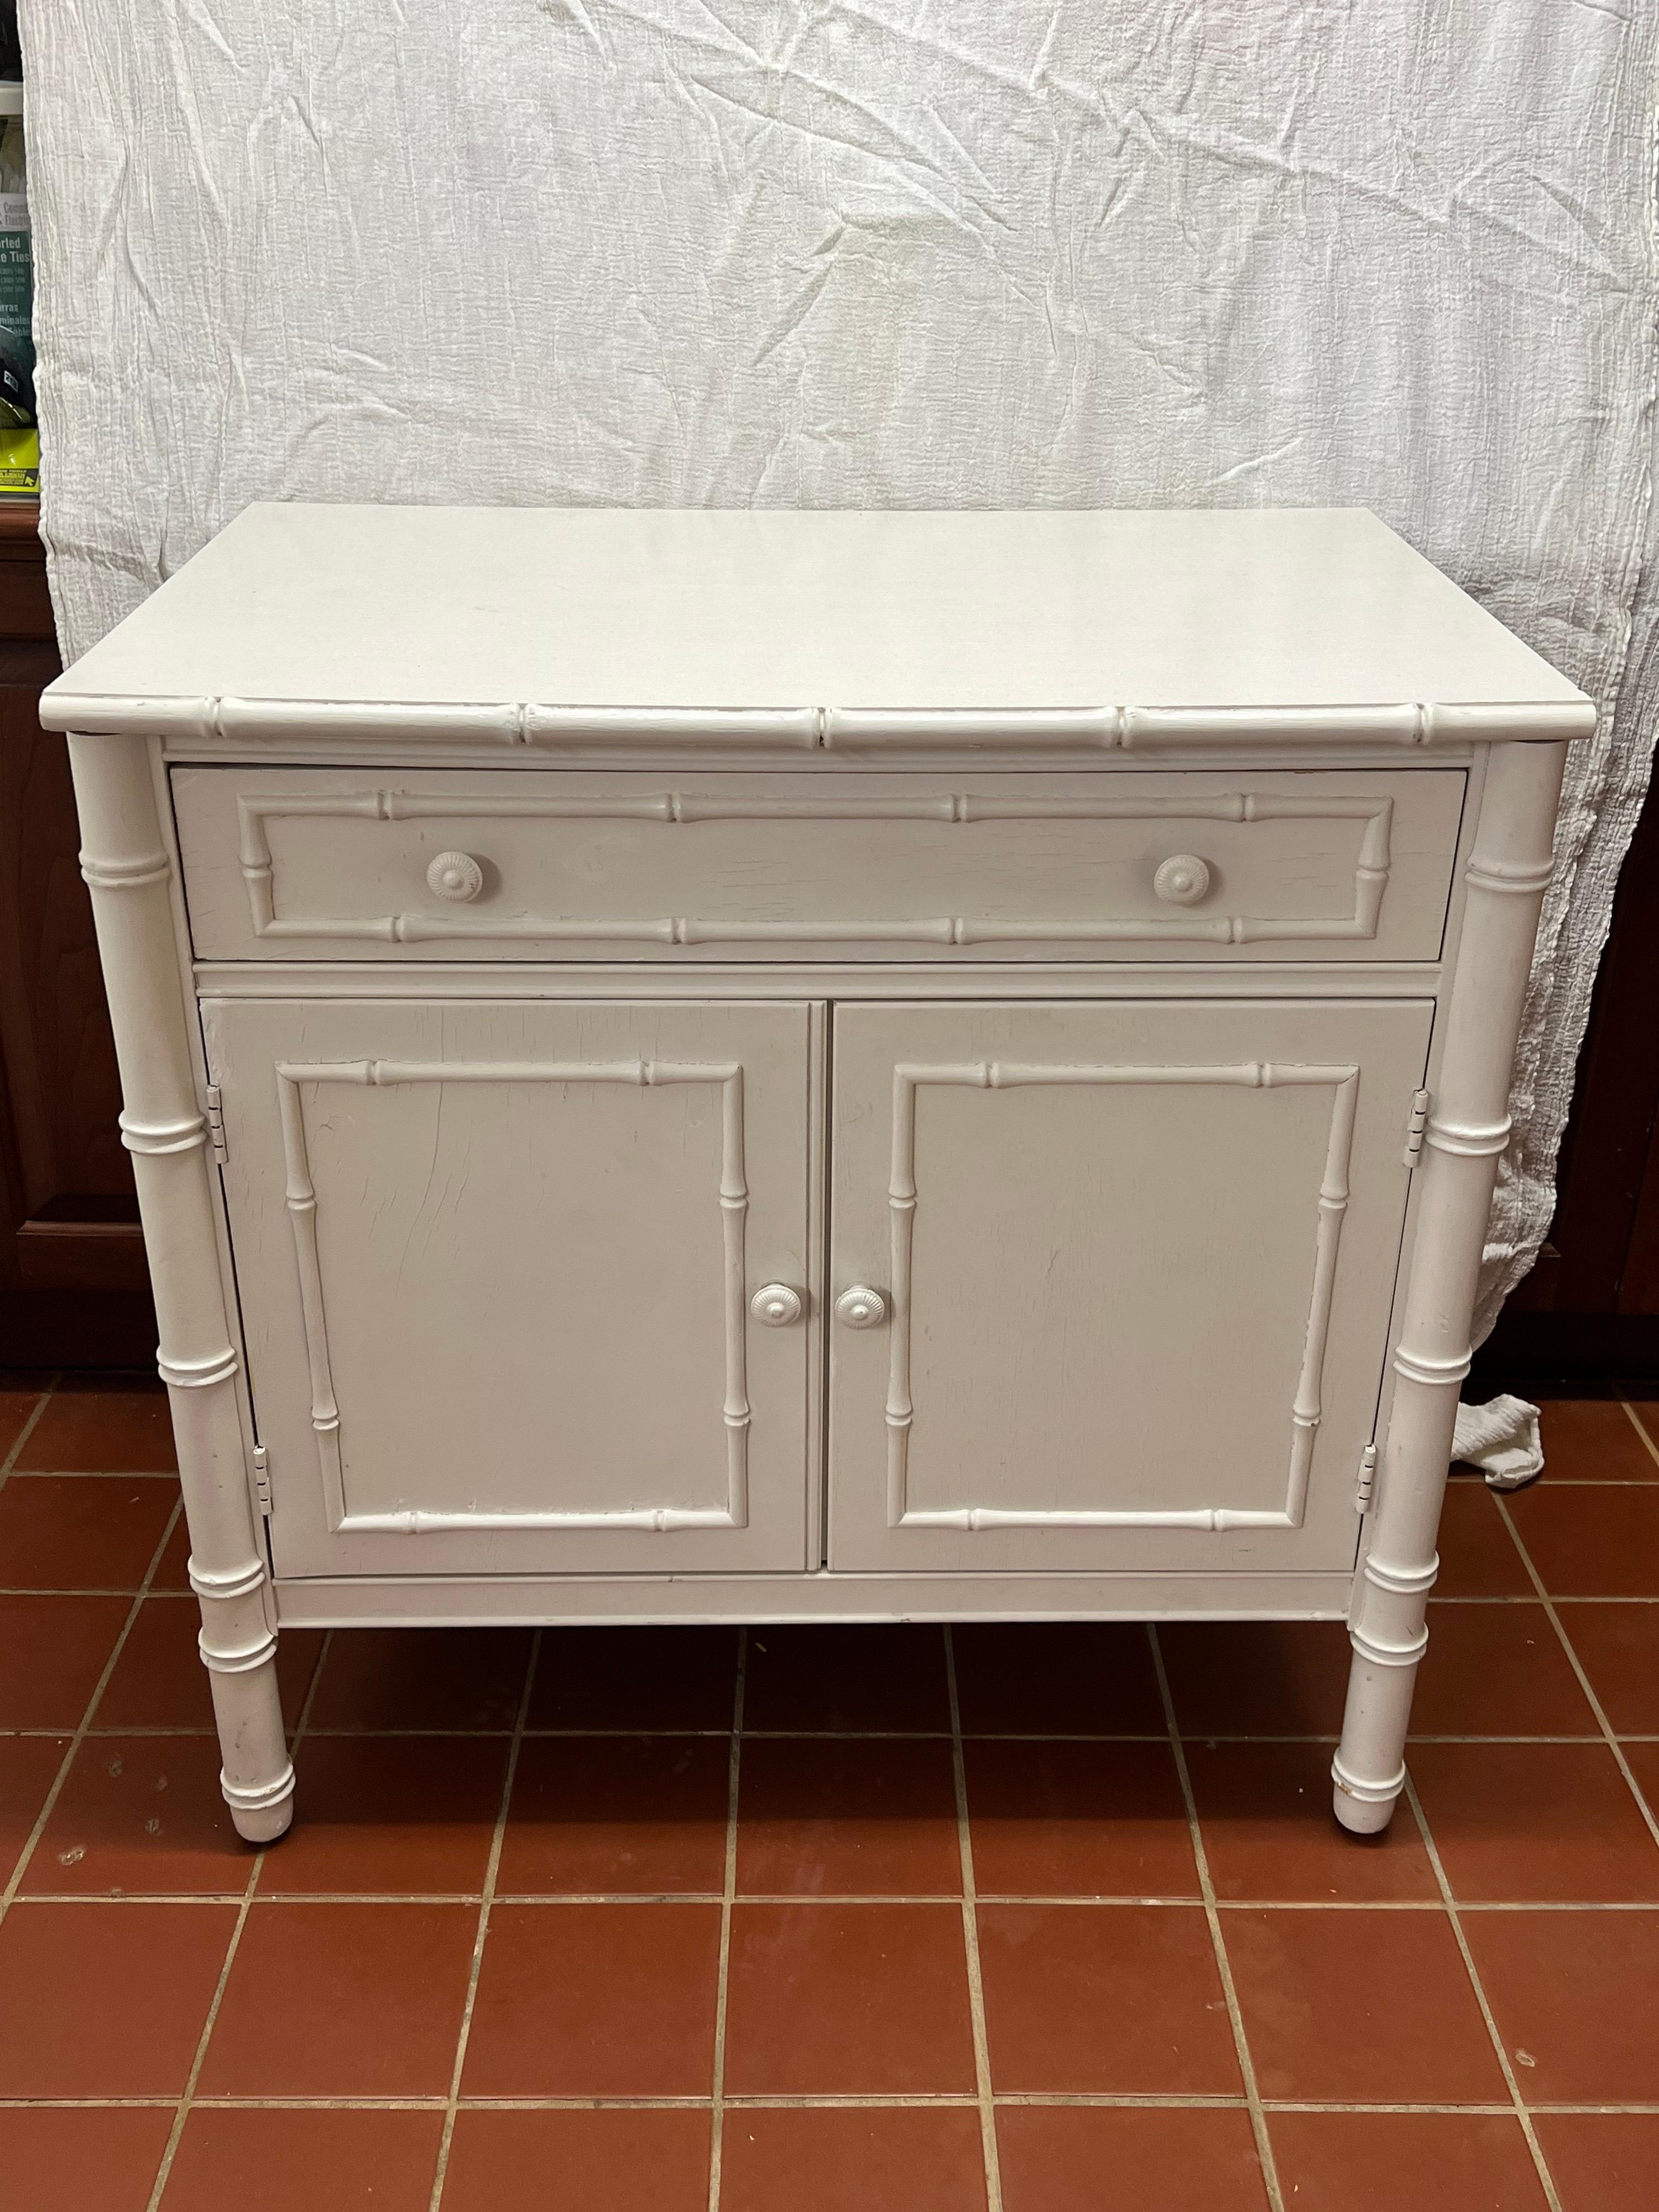 Thomasville Allegro faux bamboo Cabinet. Thomasville Allegro collection in white painted finish, laminate topped and faux bamboo accents. Classic white design to compliment any interior.